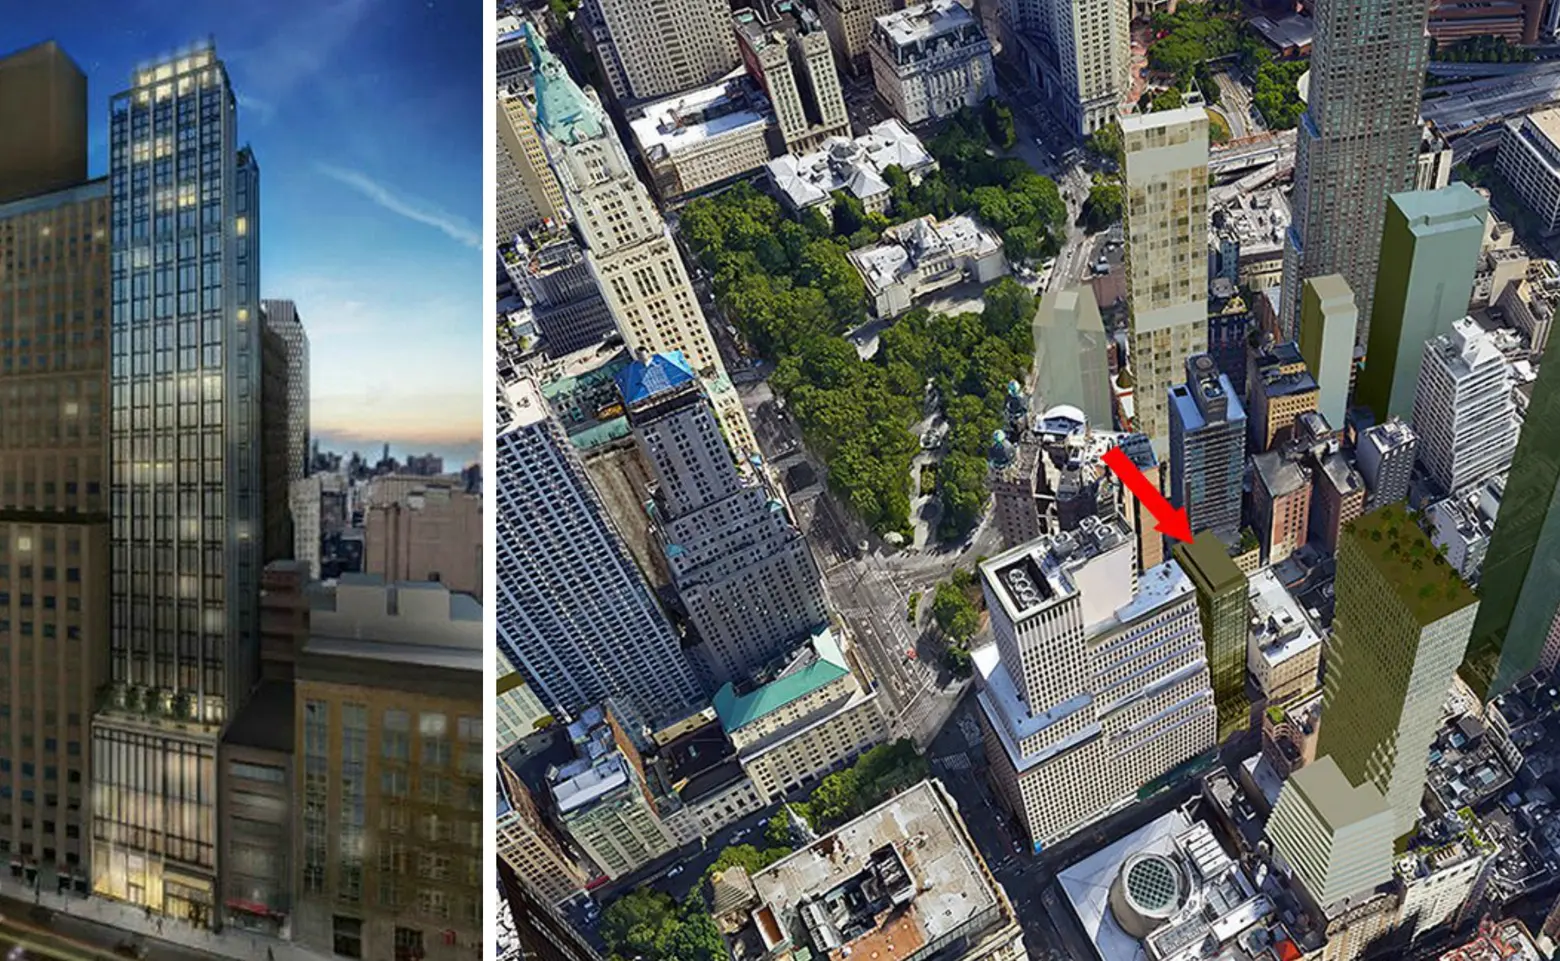 REVEALED: 26-Story, LEED-Certified Hotel Coming to the Financial District